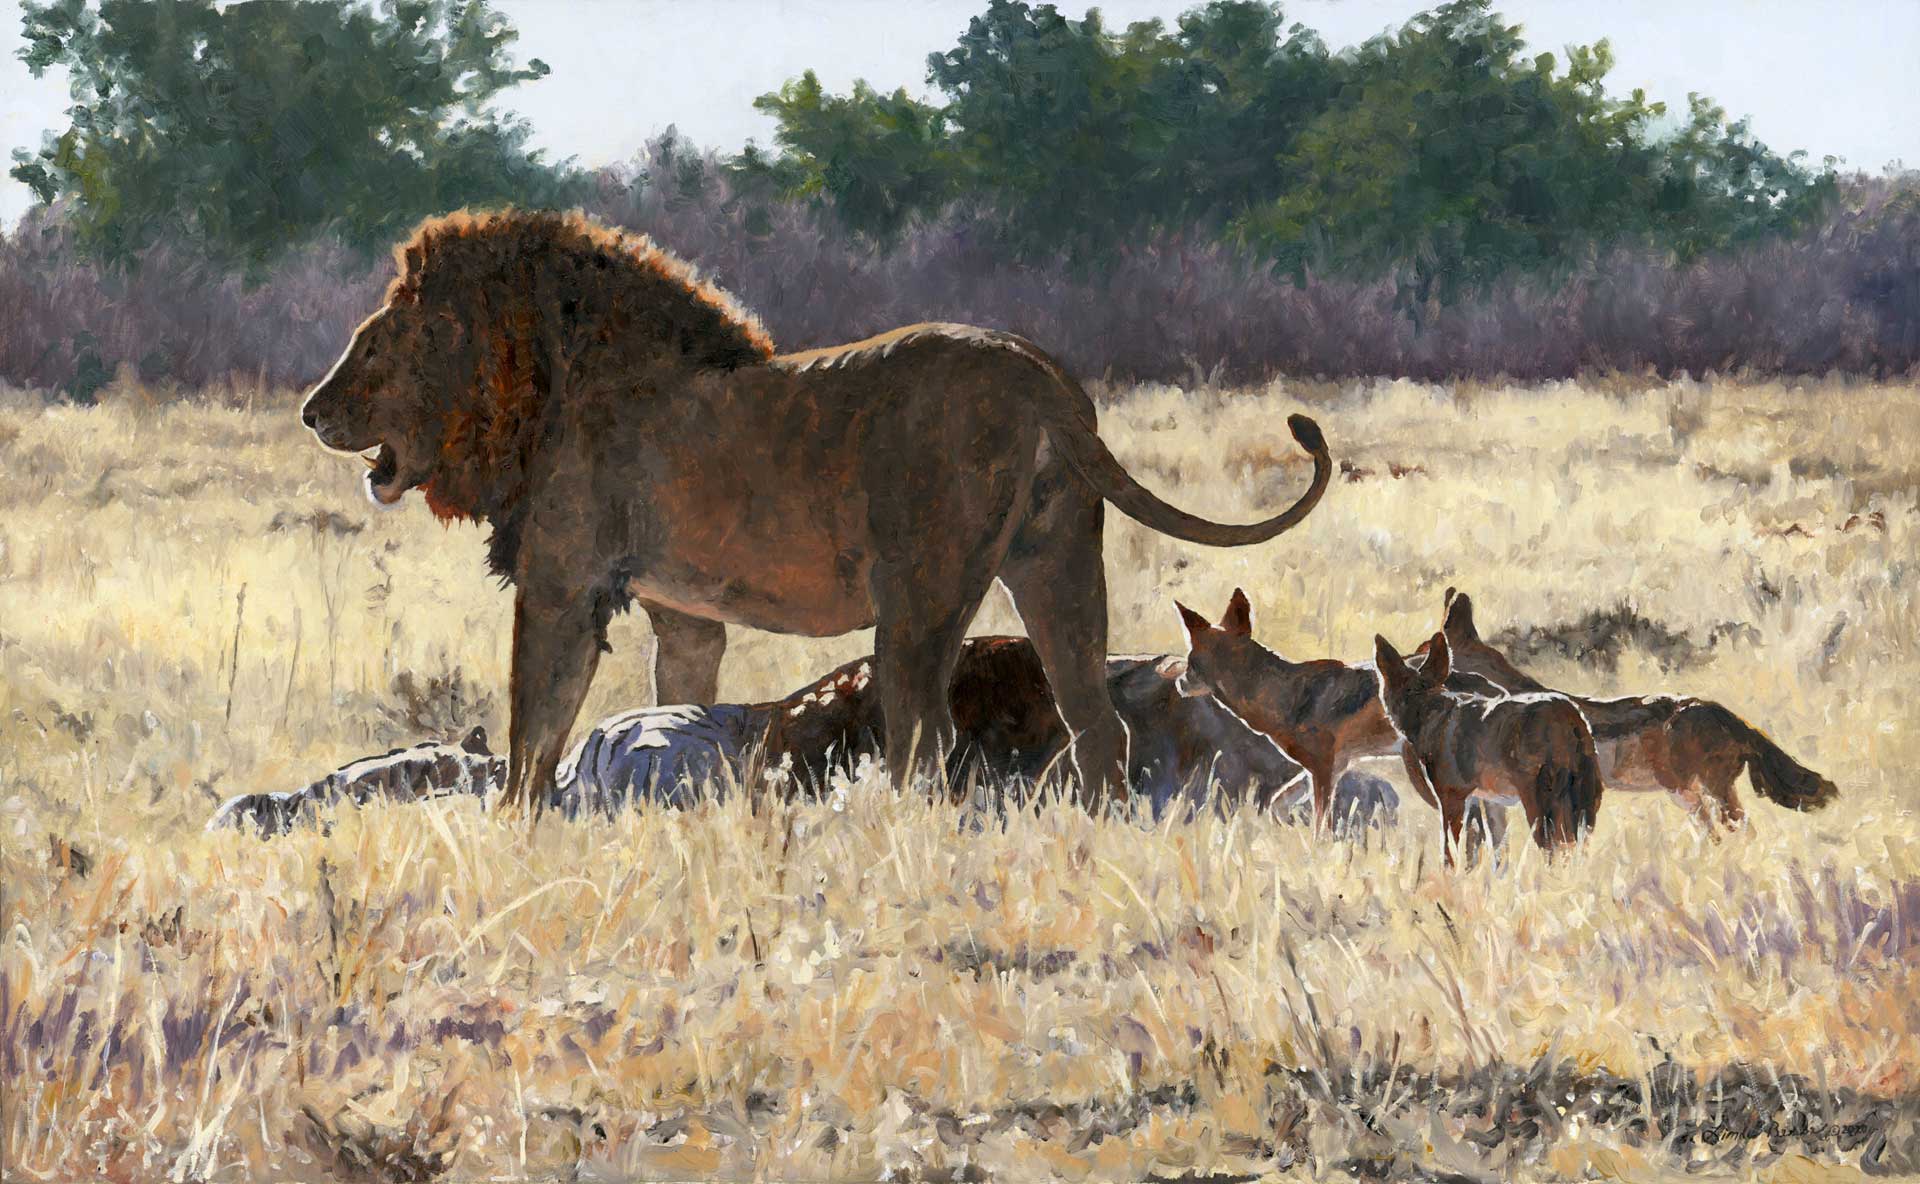 Feast. Original oil painting by Linda Besse. When the King of the Beasts feeds, it is a feast for many. 